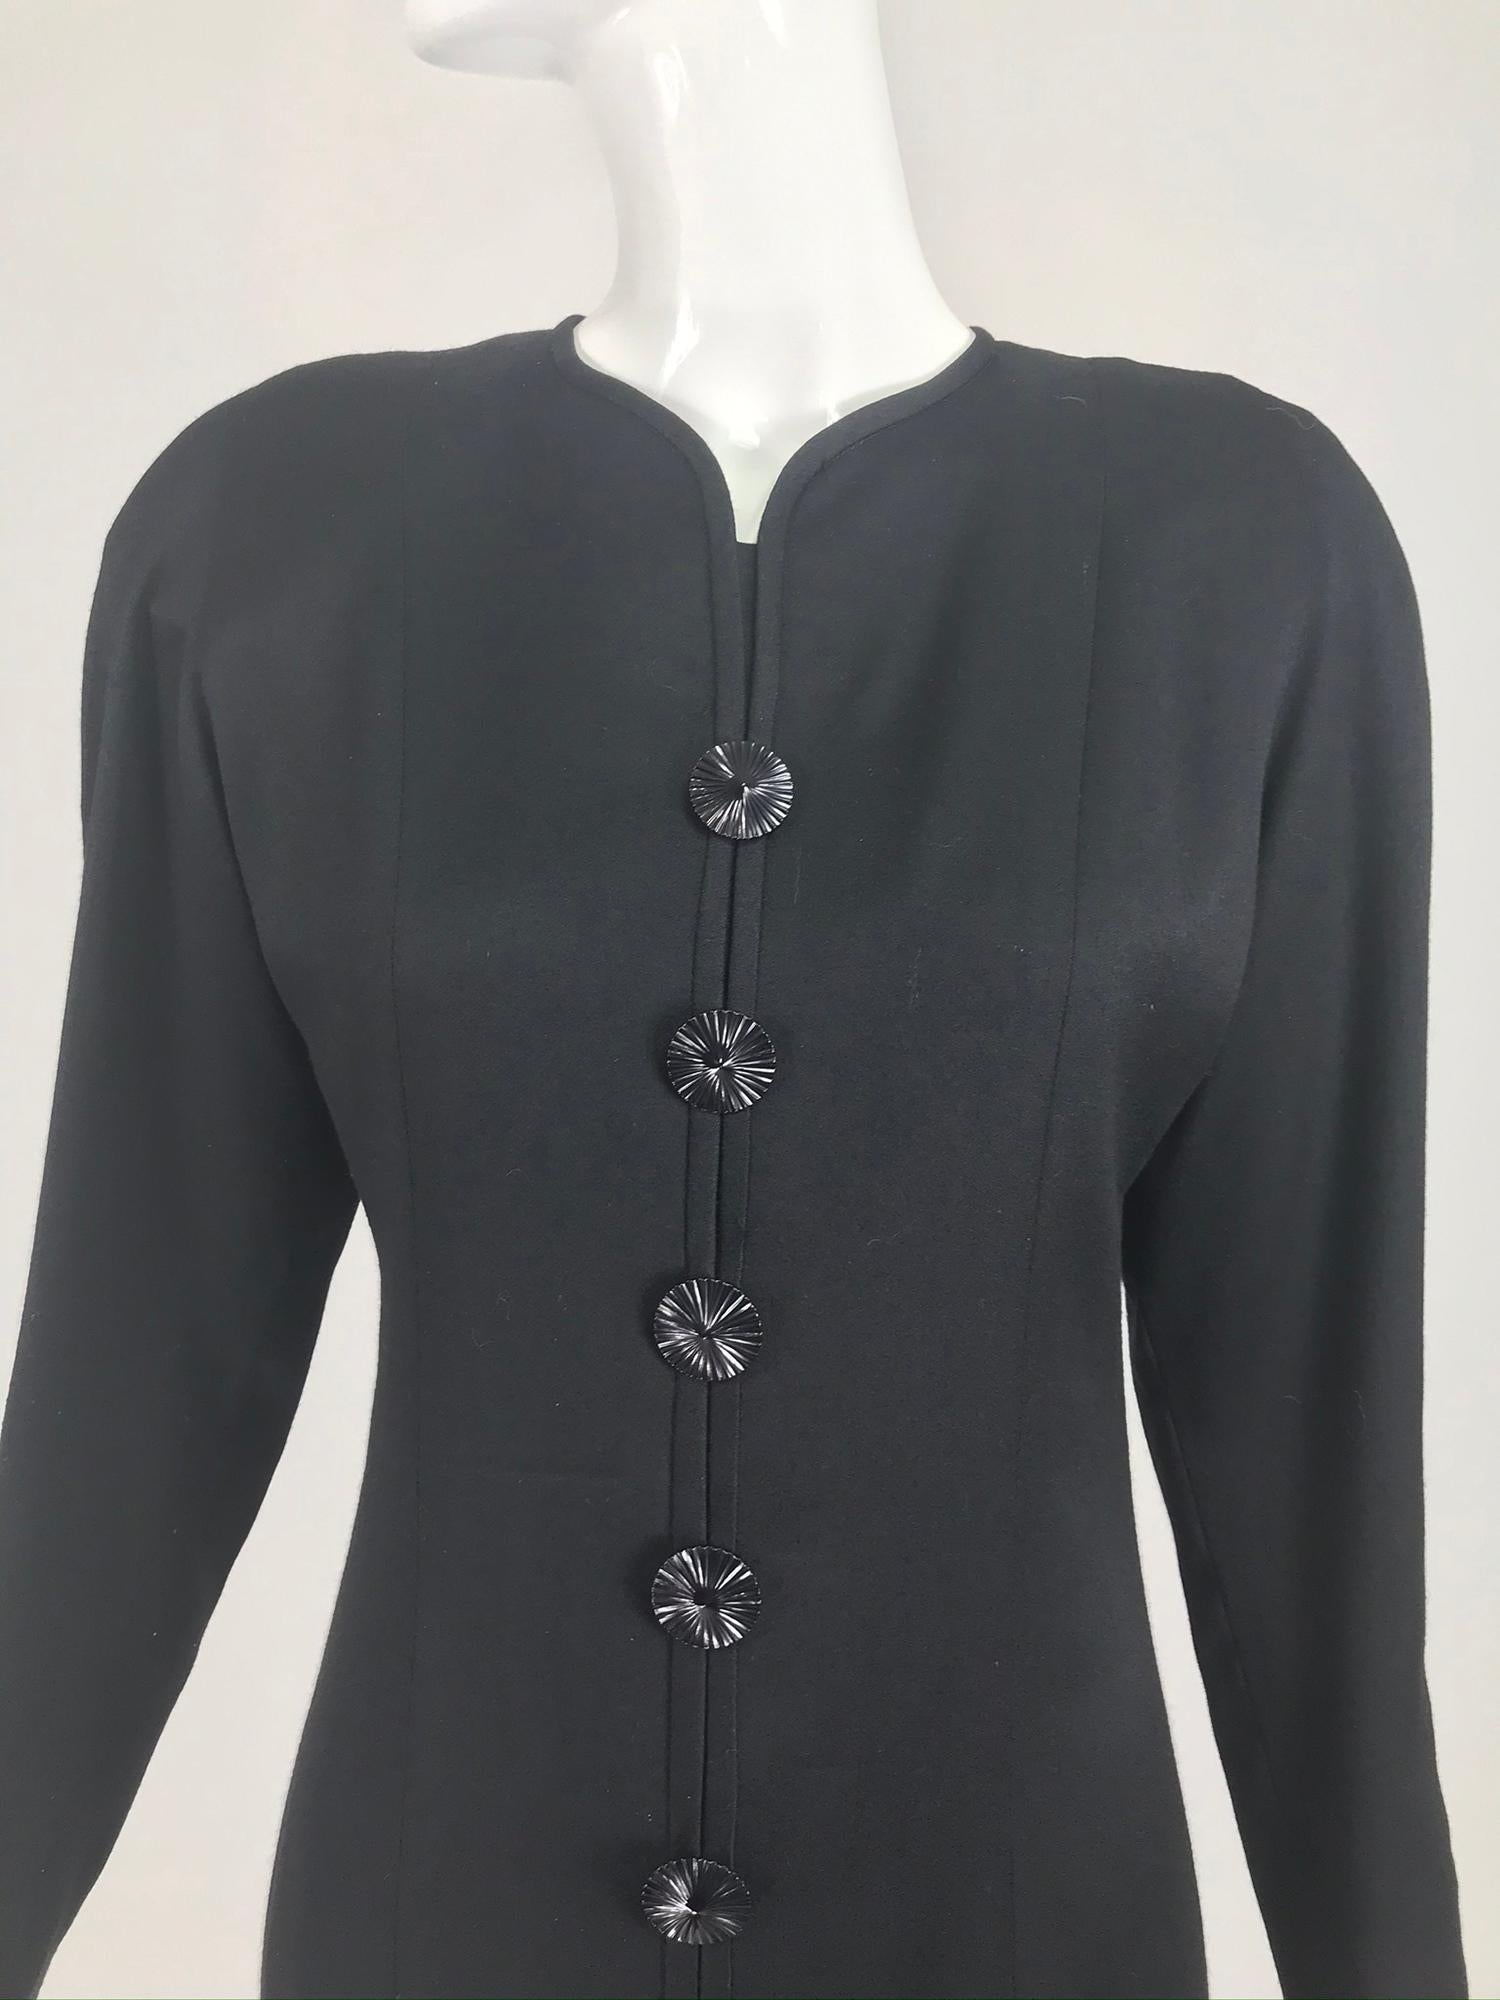 Nina Ricci semi fitted black lightweight wool flannel dress with flared hem from the 1980s. This beautiful dress has long sleeves with button detail cuffs, the dress front has non working button detail, set in decorative top stitched ourtline seams